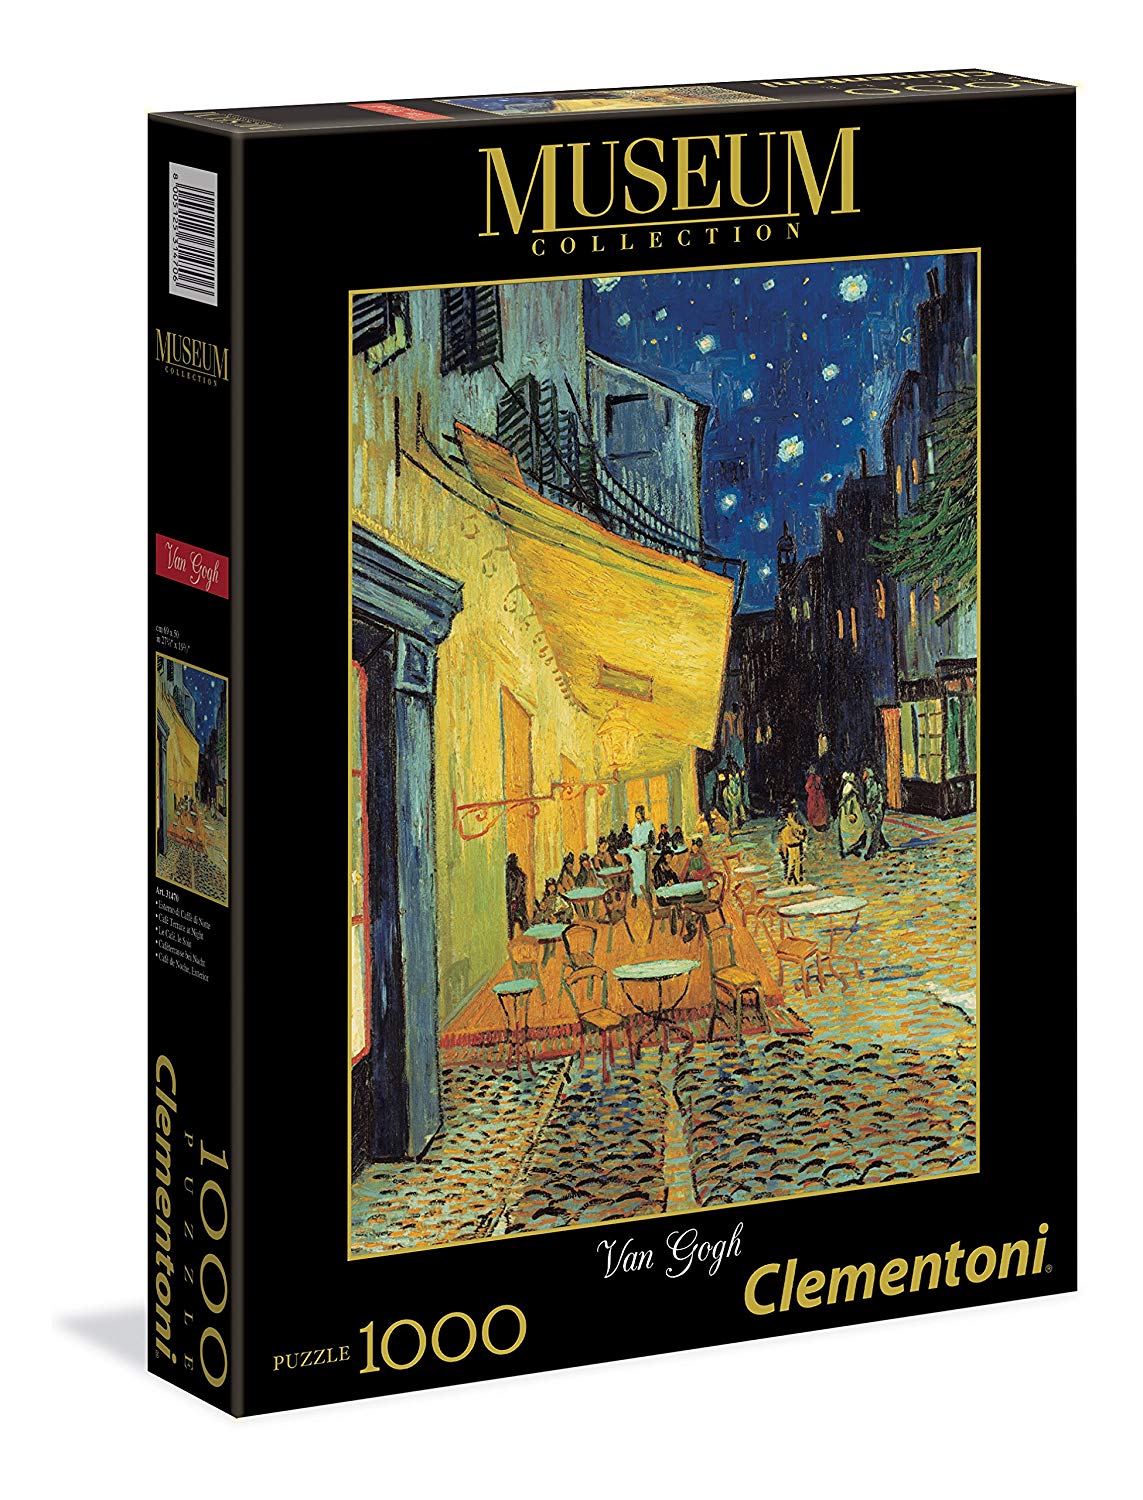 Clementoni Jigsaw Puzzle Collection 1000 Pieces Various Models Available